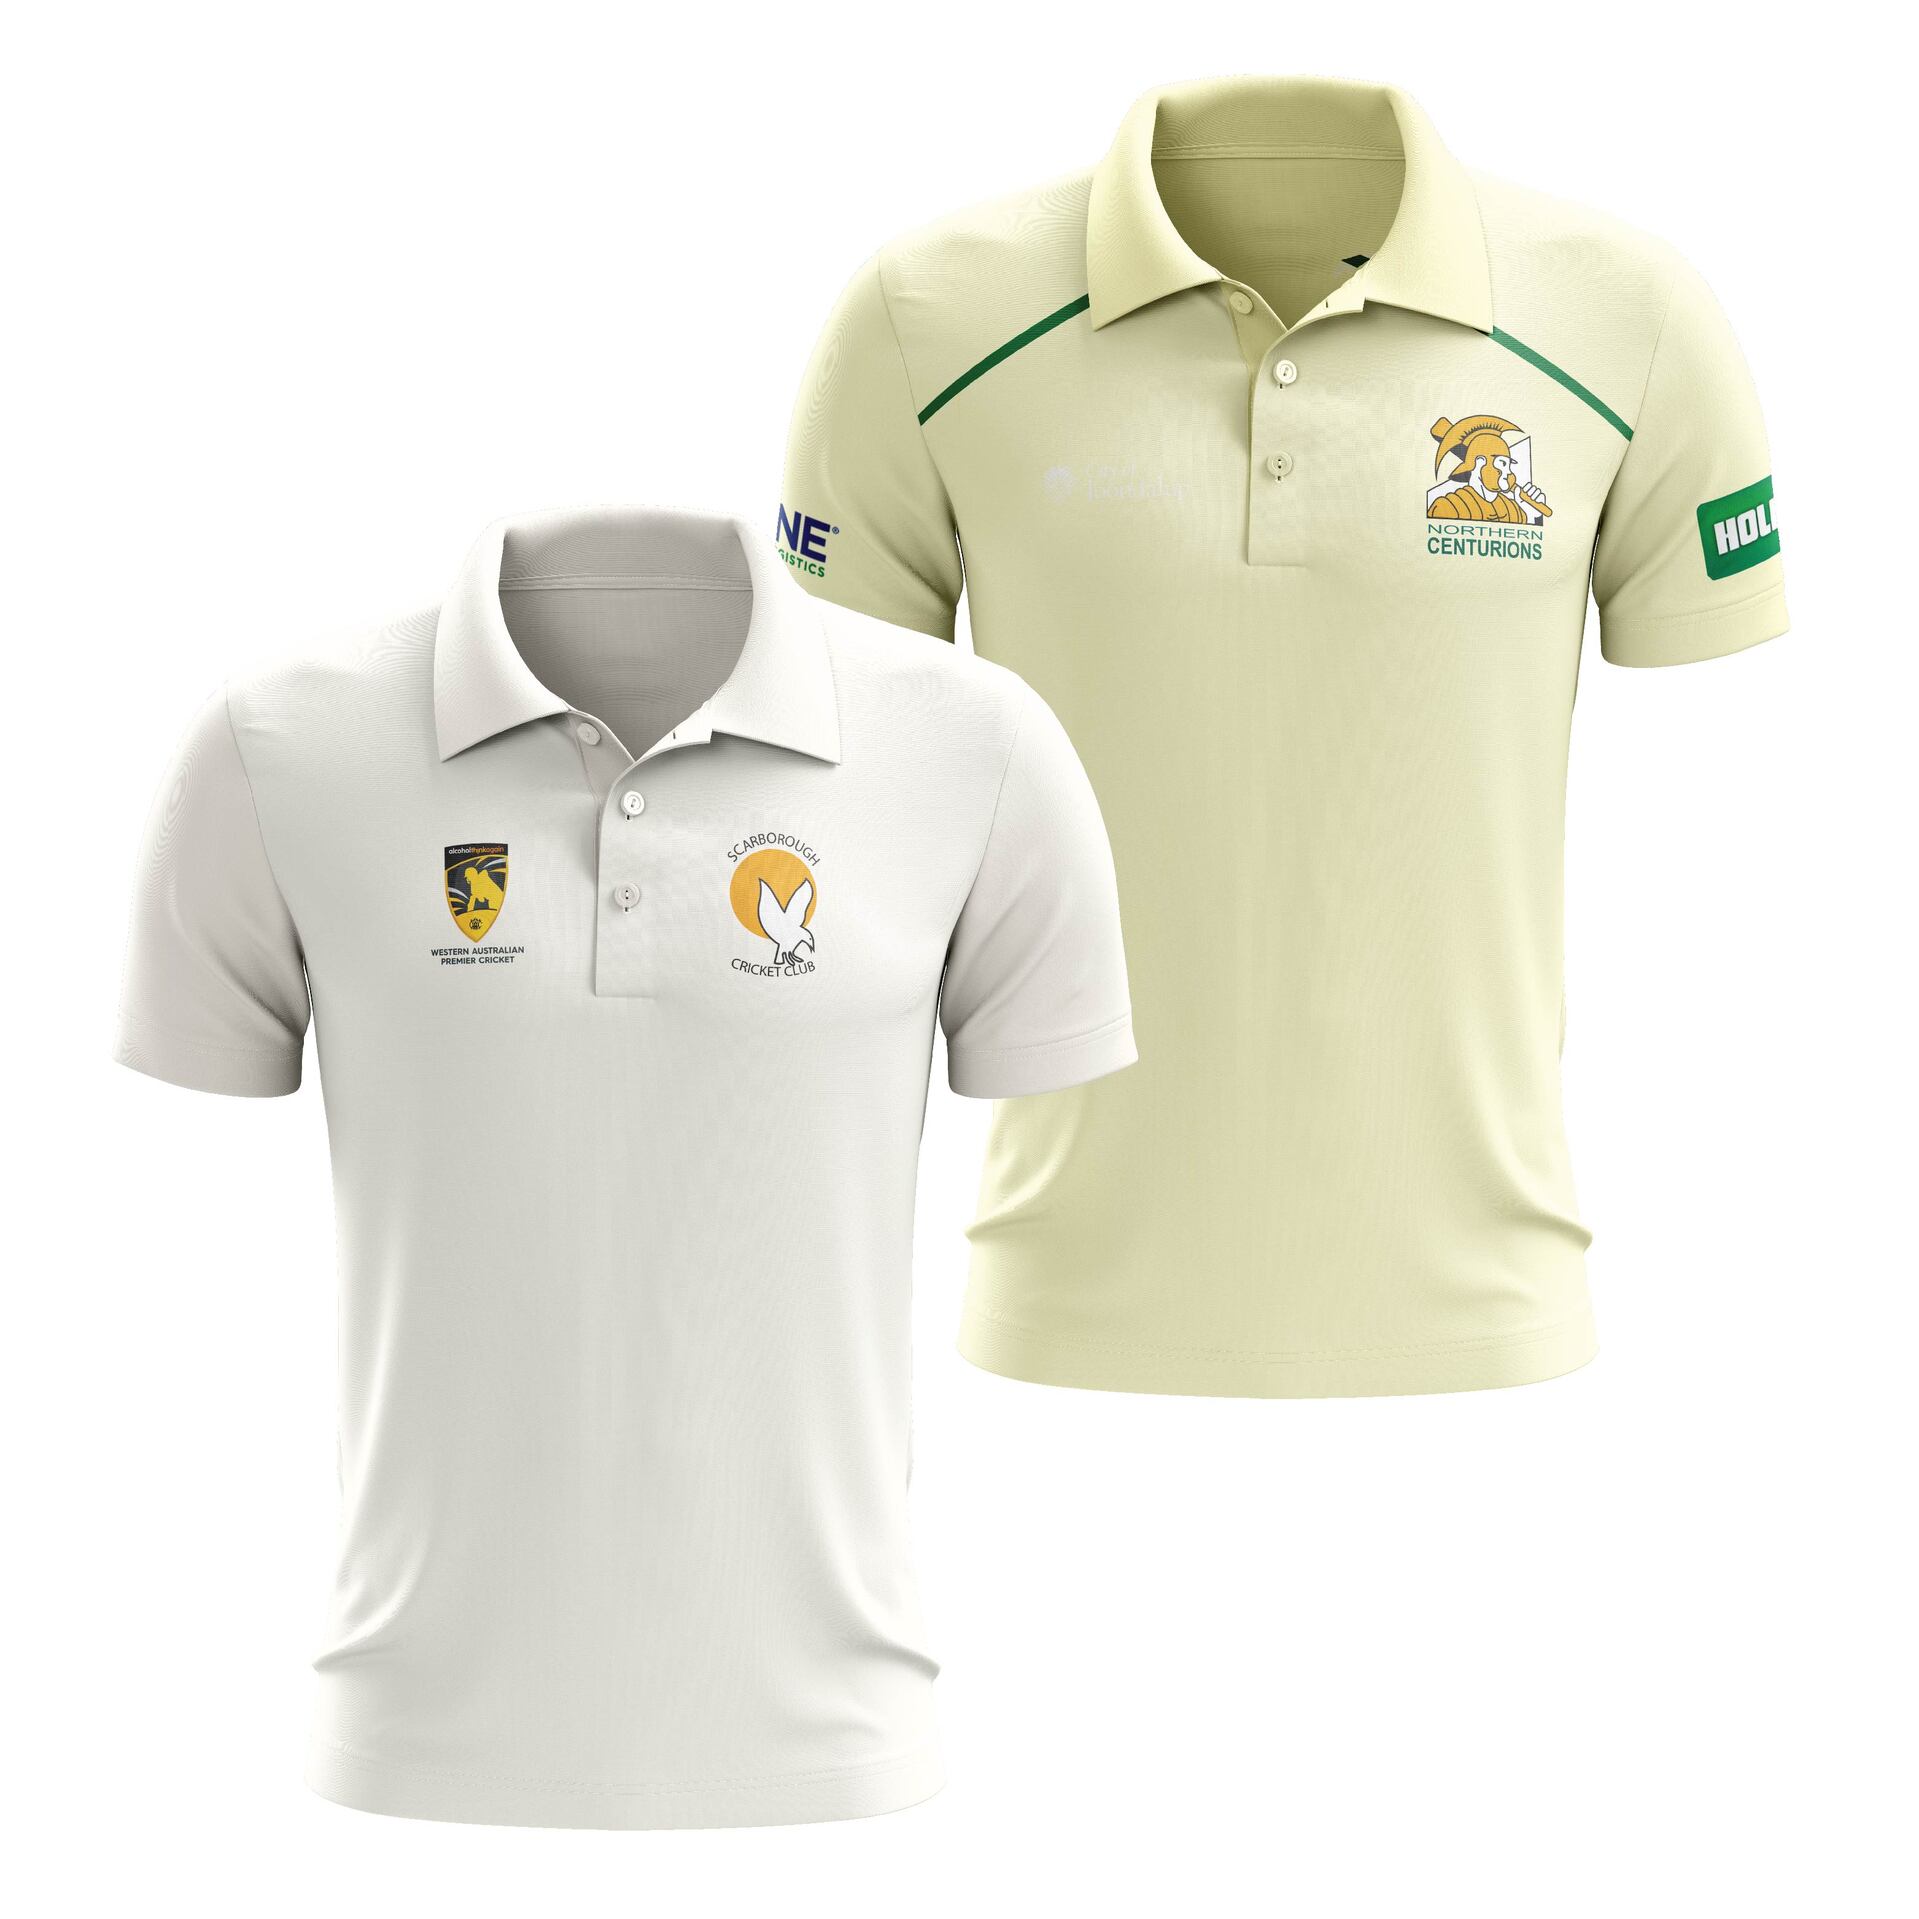 Buy Sublimated Two Day Cricket Shirt - Short Sleeve - 175gsm Ultramesh ...